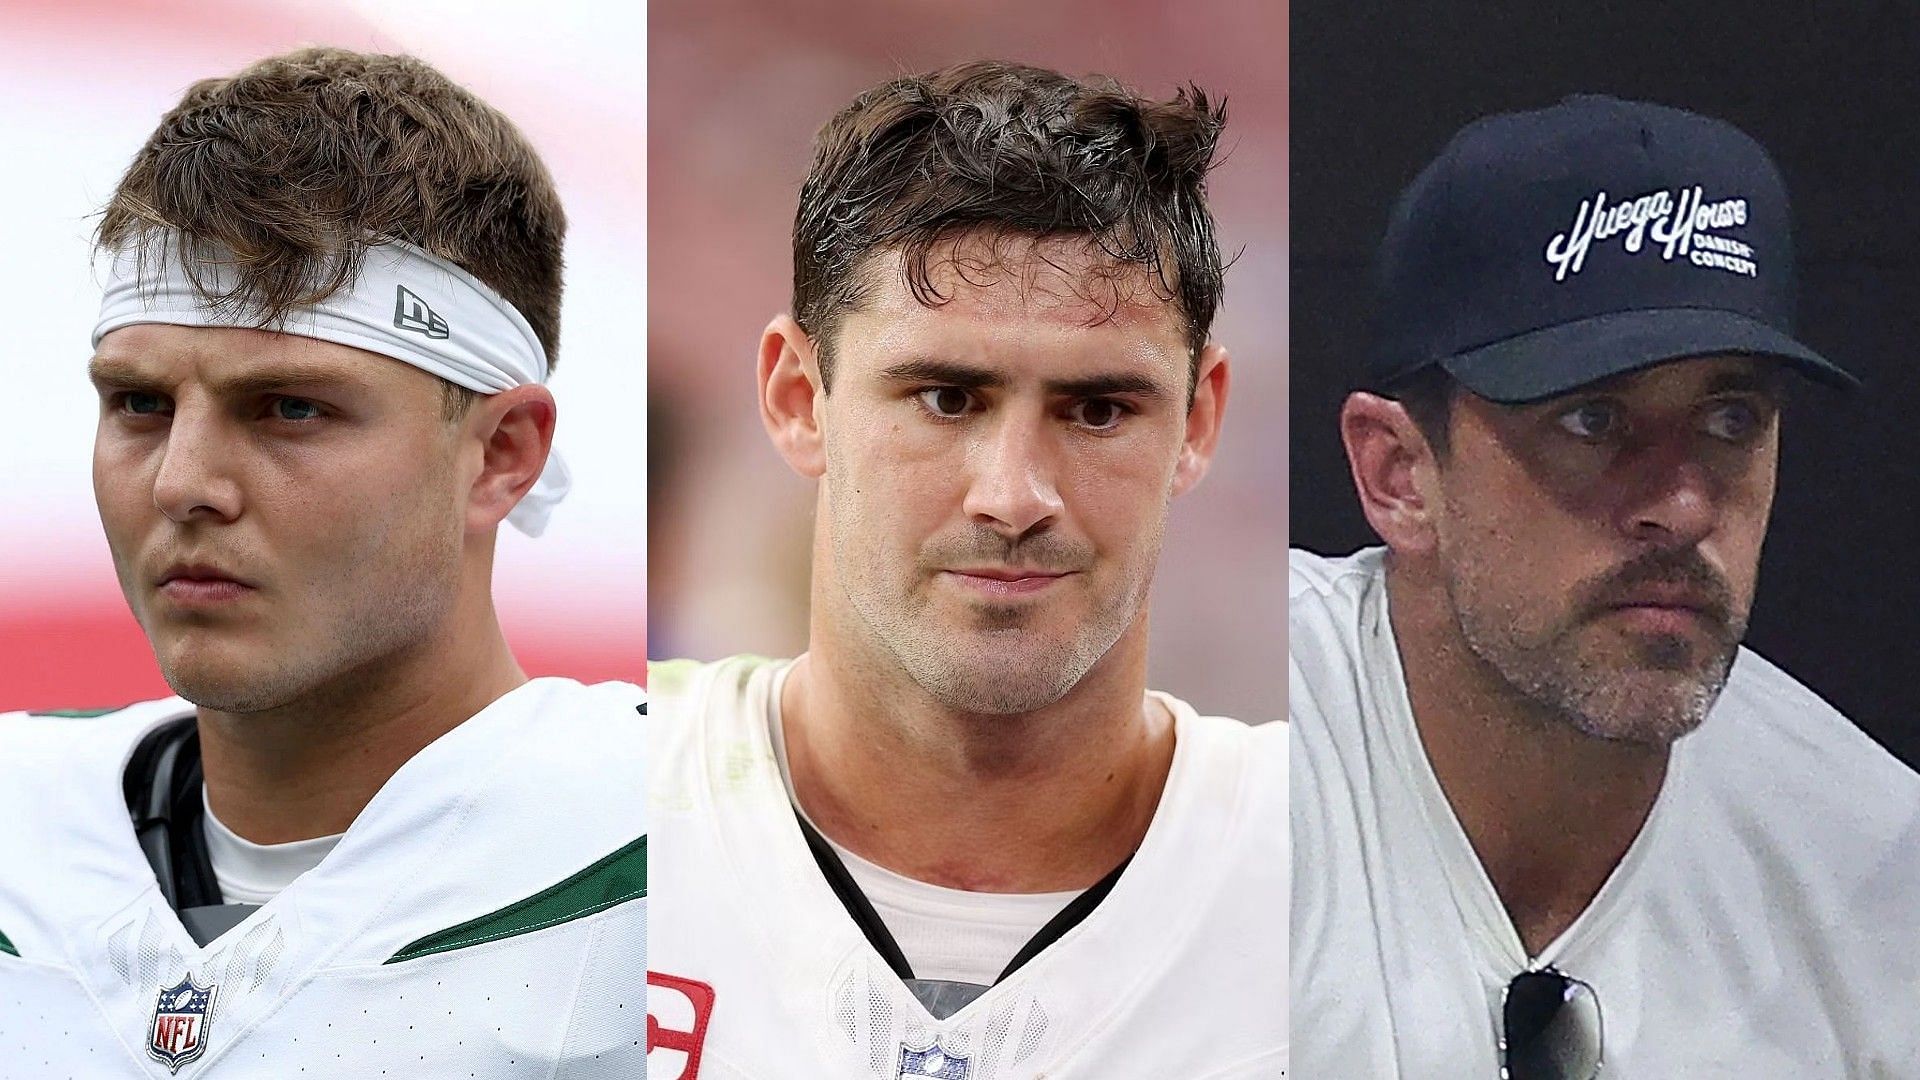 Aaron Rodgers and Zach Wilson or Daniel Jones? Pat McAfee picks most hopeless New York franchise as teams fall to 2-6 combined